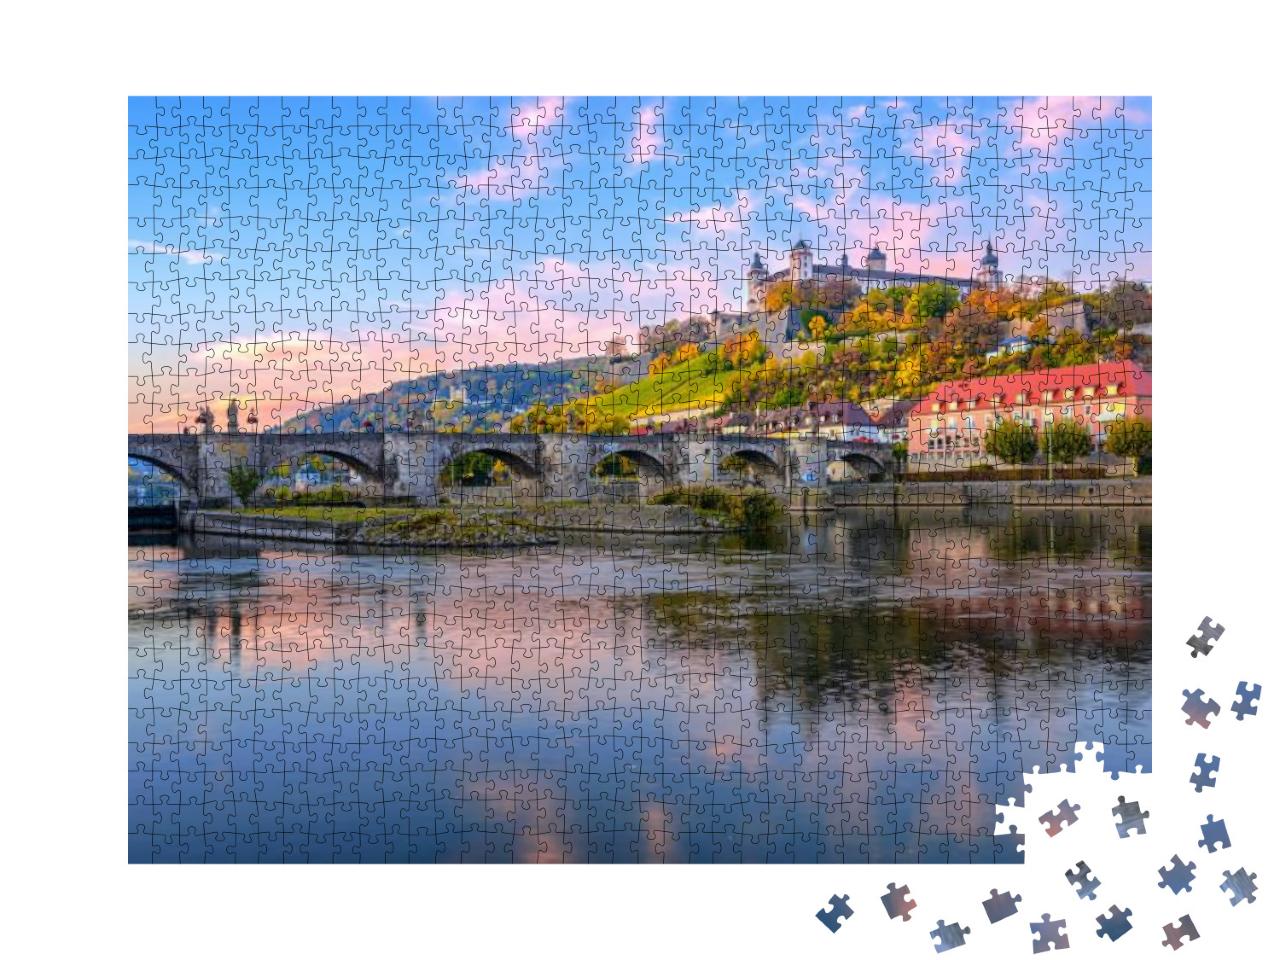 Wurzburg, Bavaria, Germany, View of the Marienberg Fortre... Jigsaw Puzzle with 1000 pieces